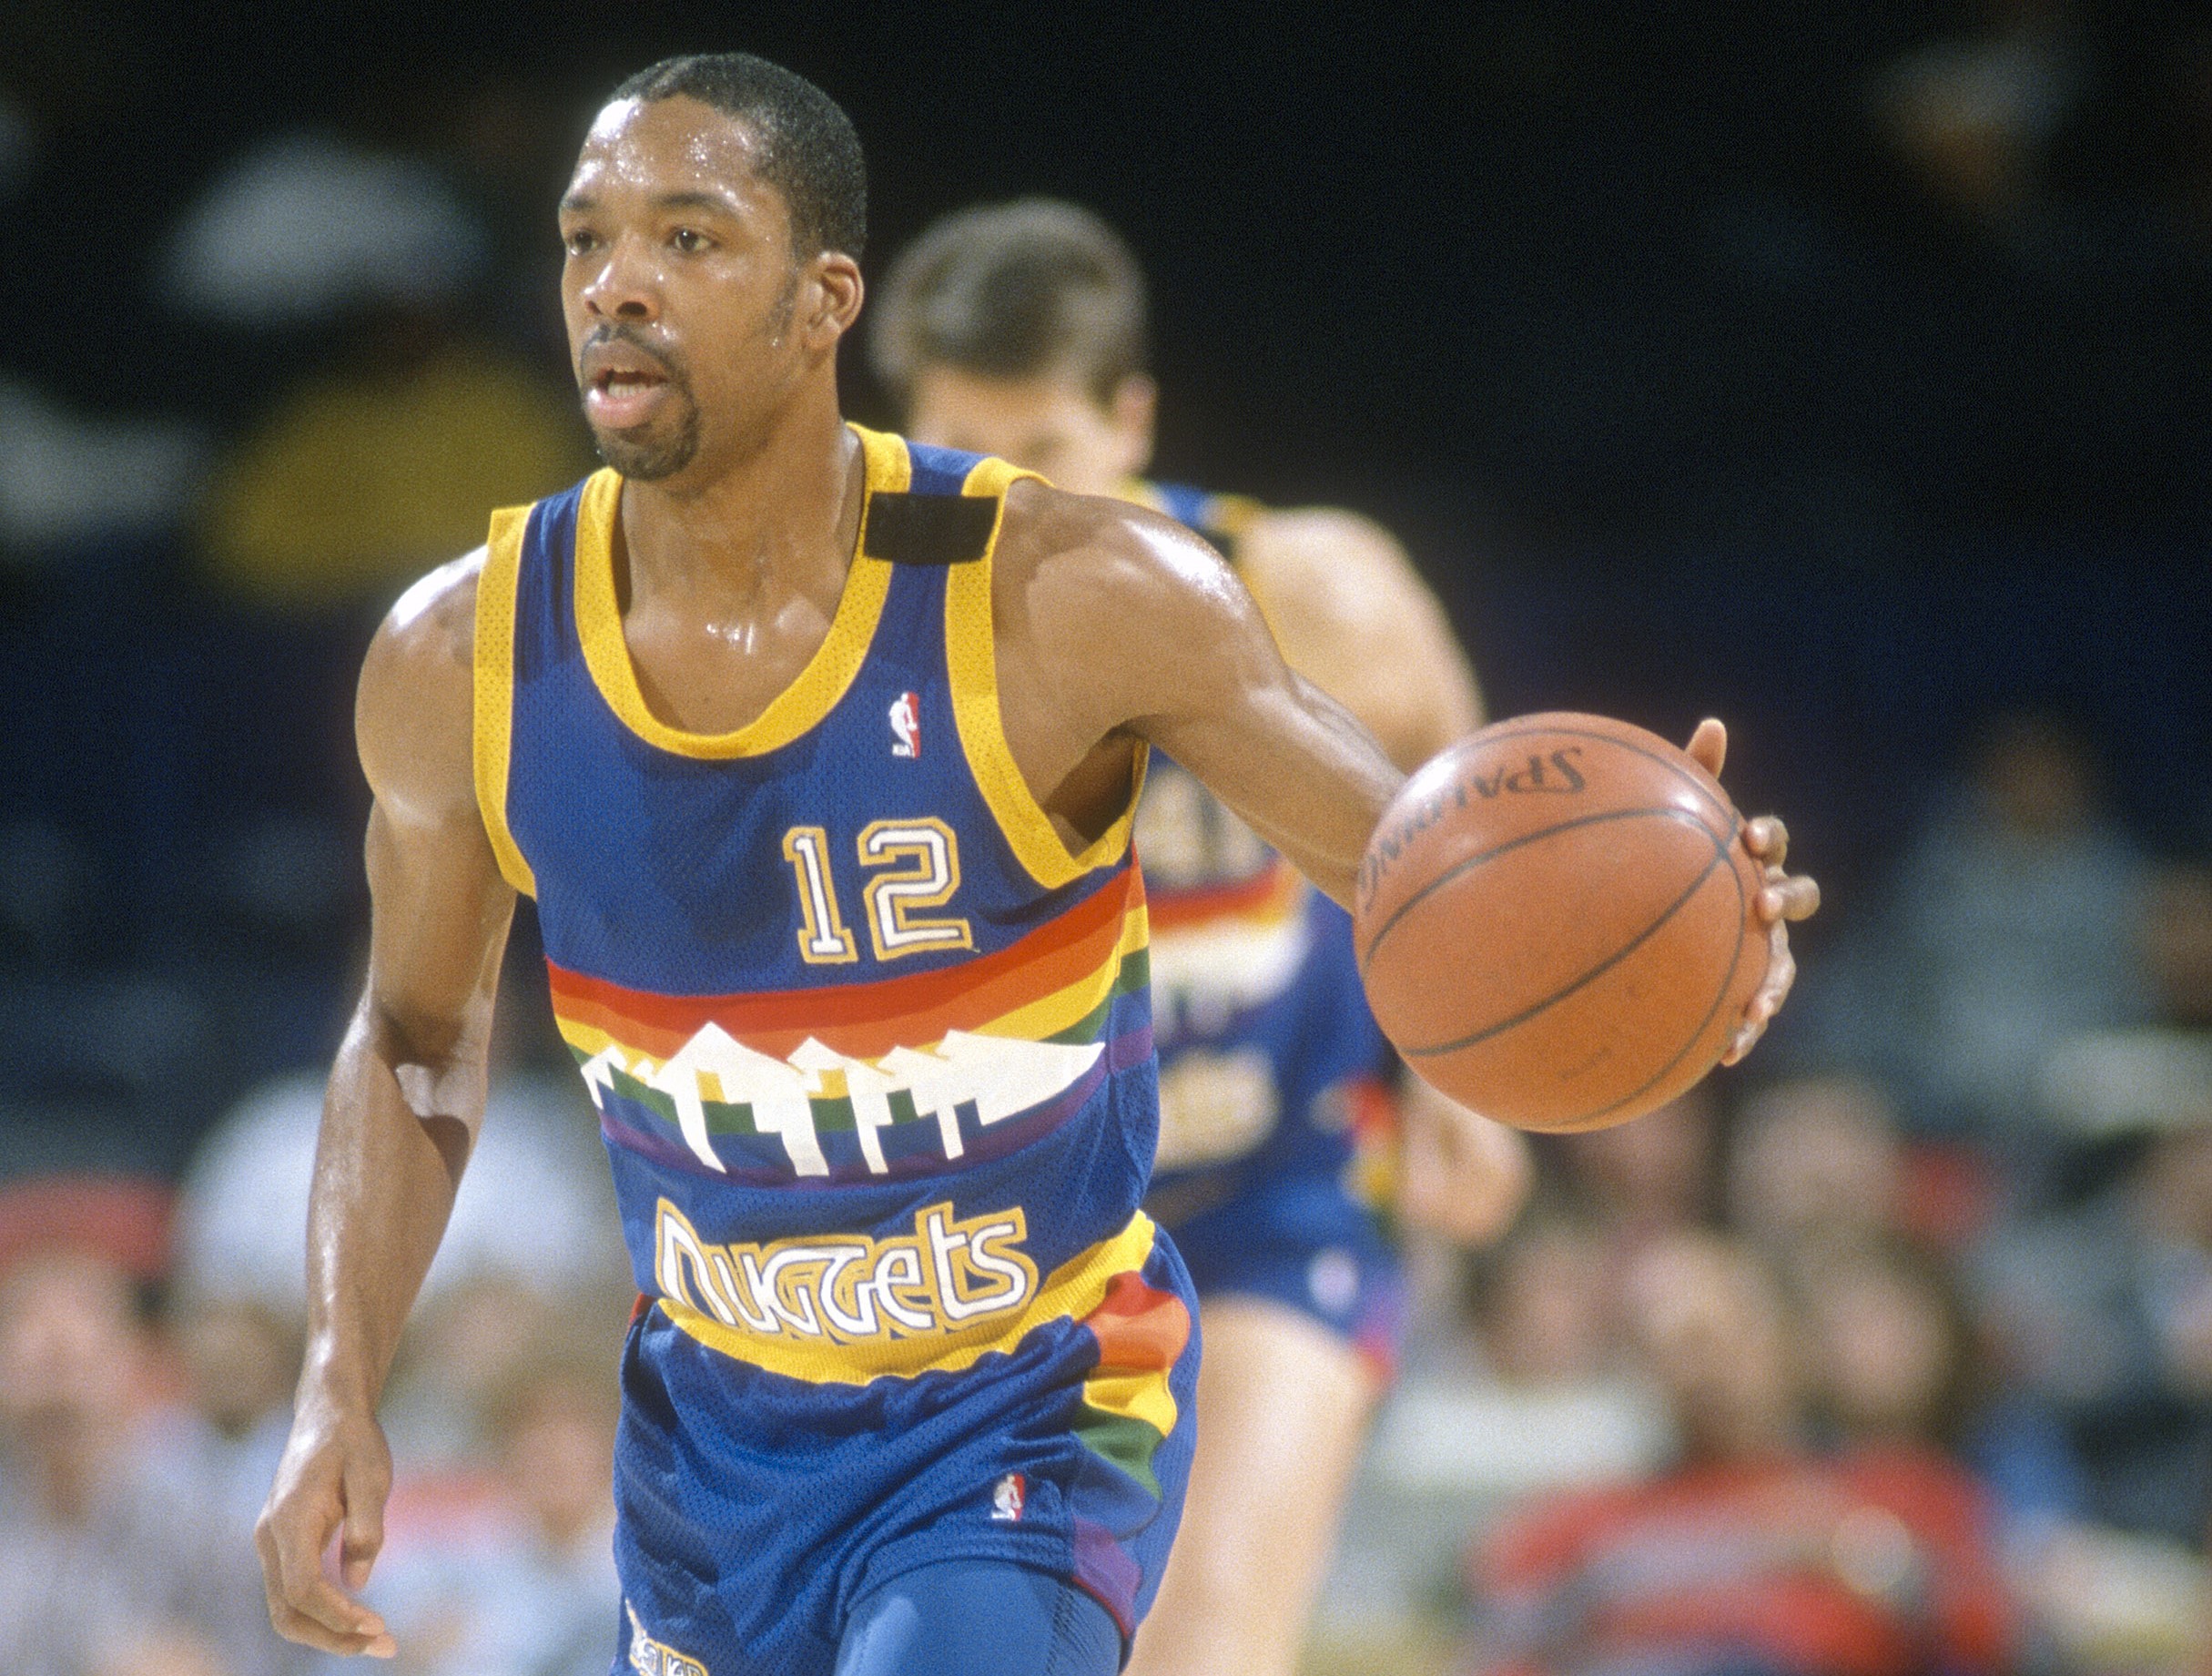 The Fat Lever of the Denver Nuggets runs the field.